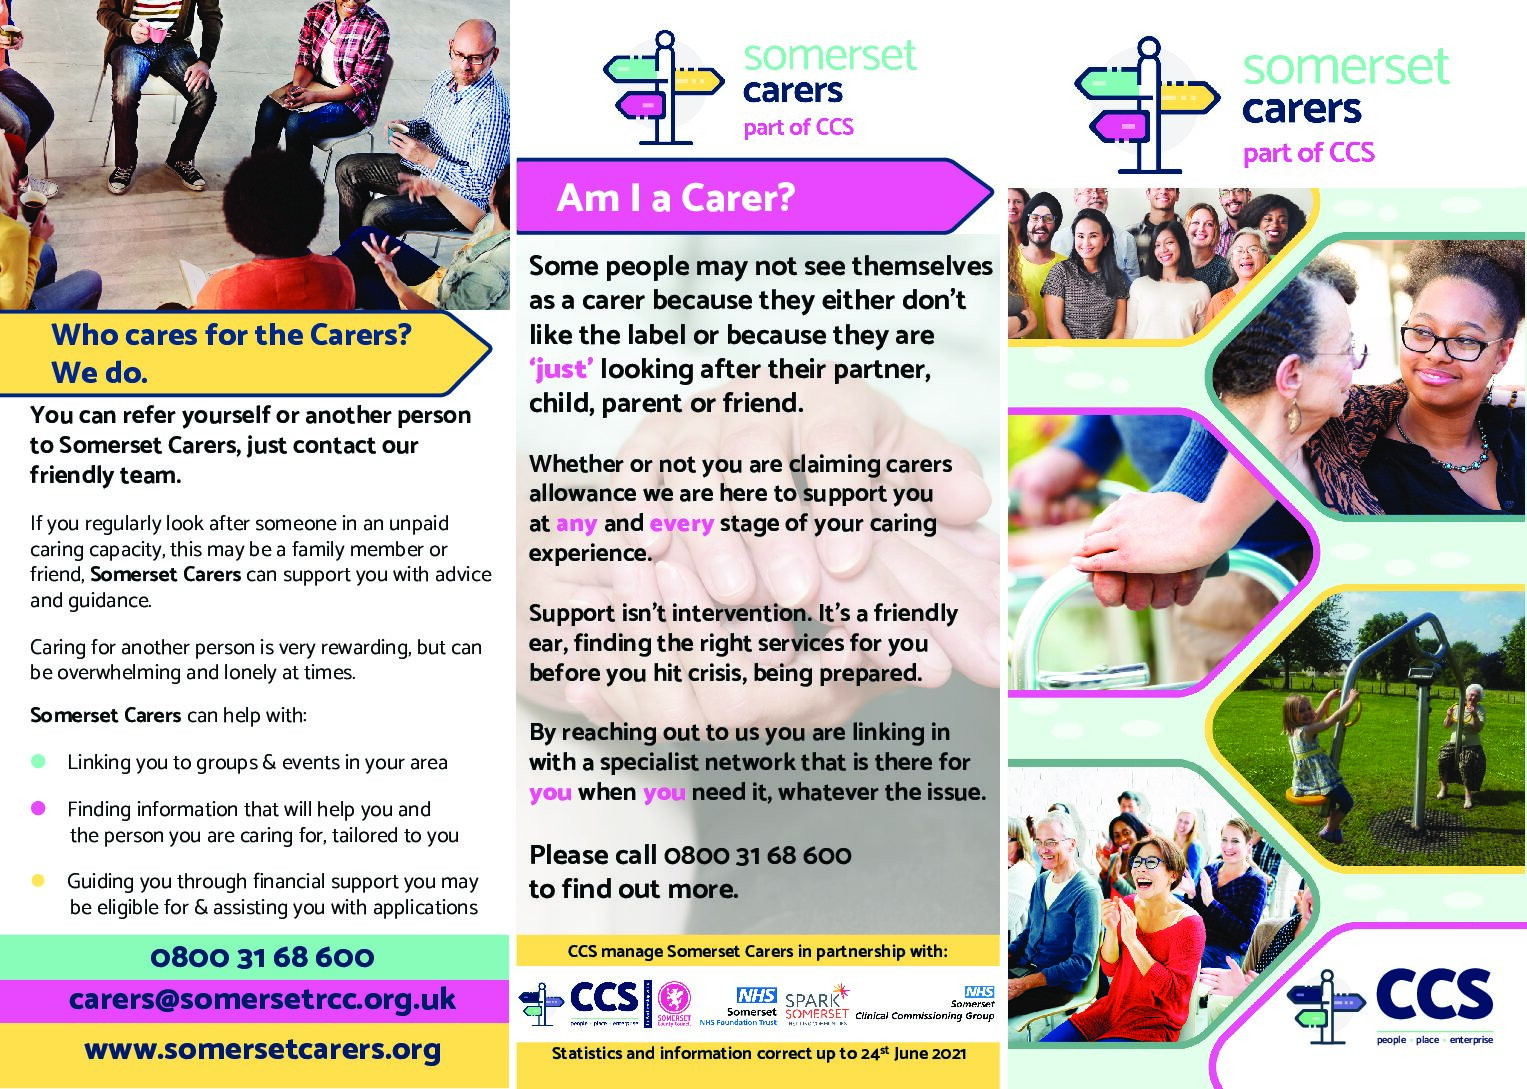 Important information for unpaid carers